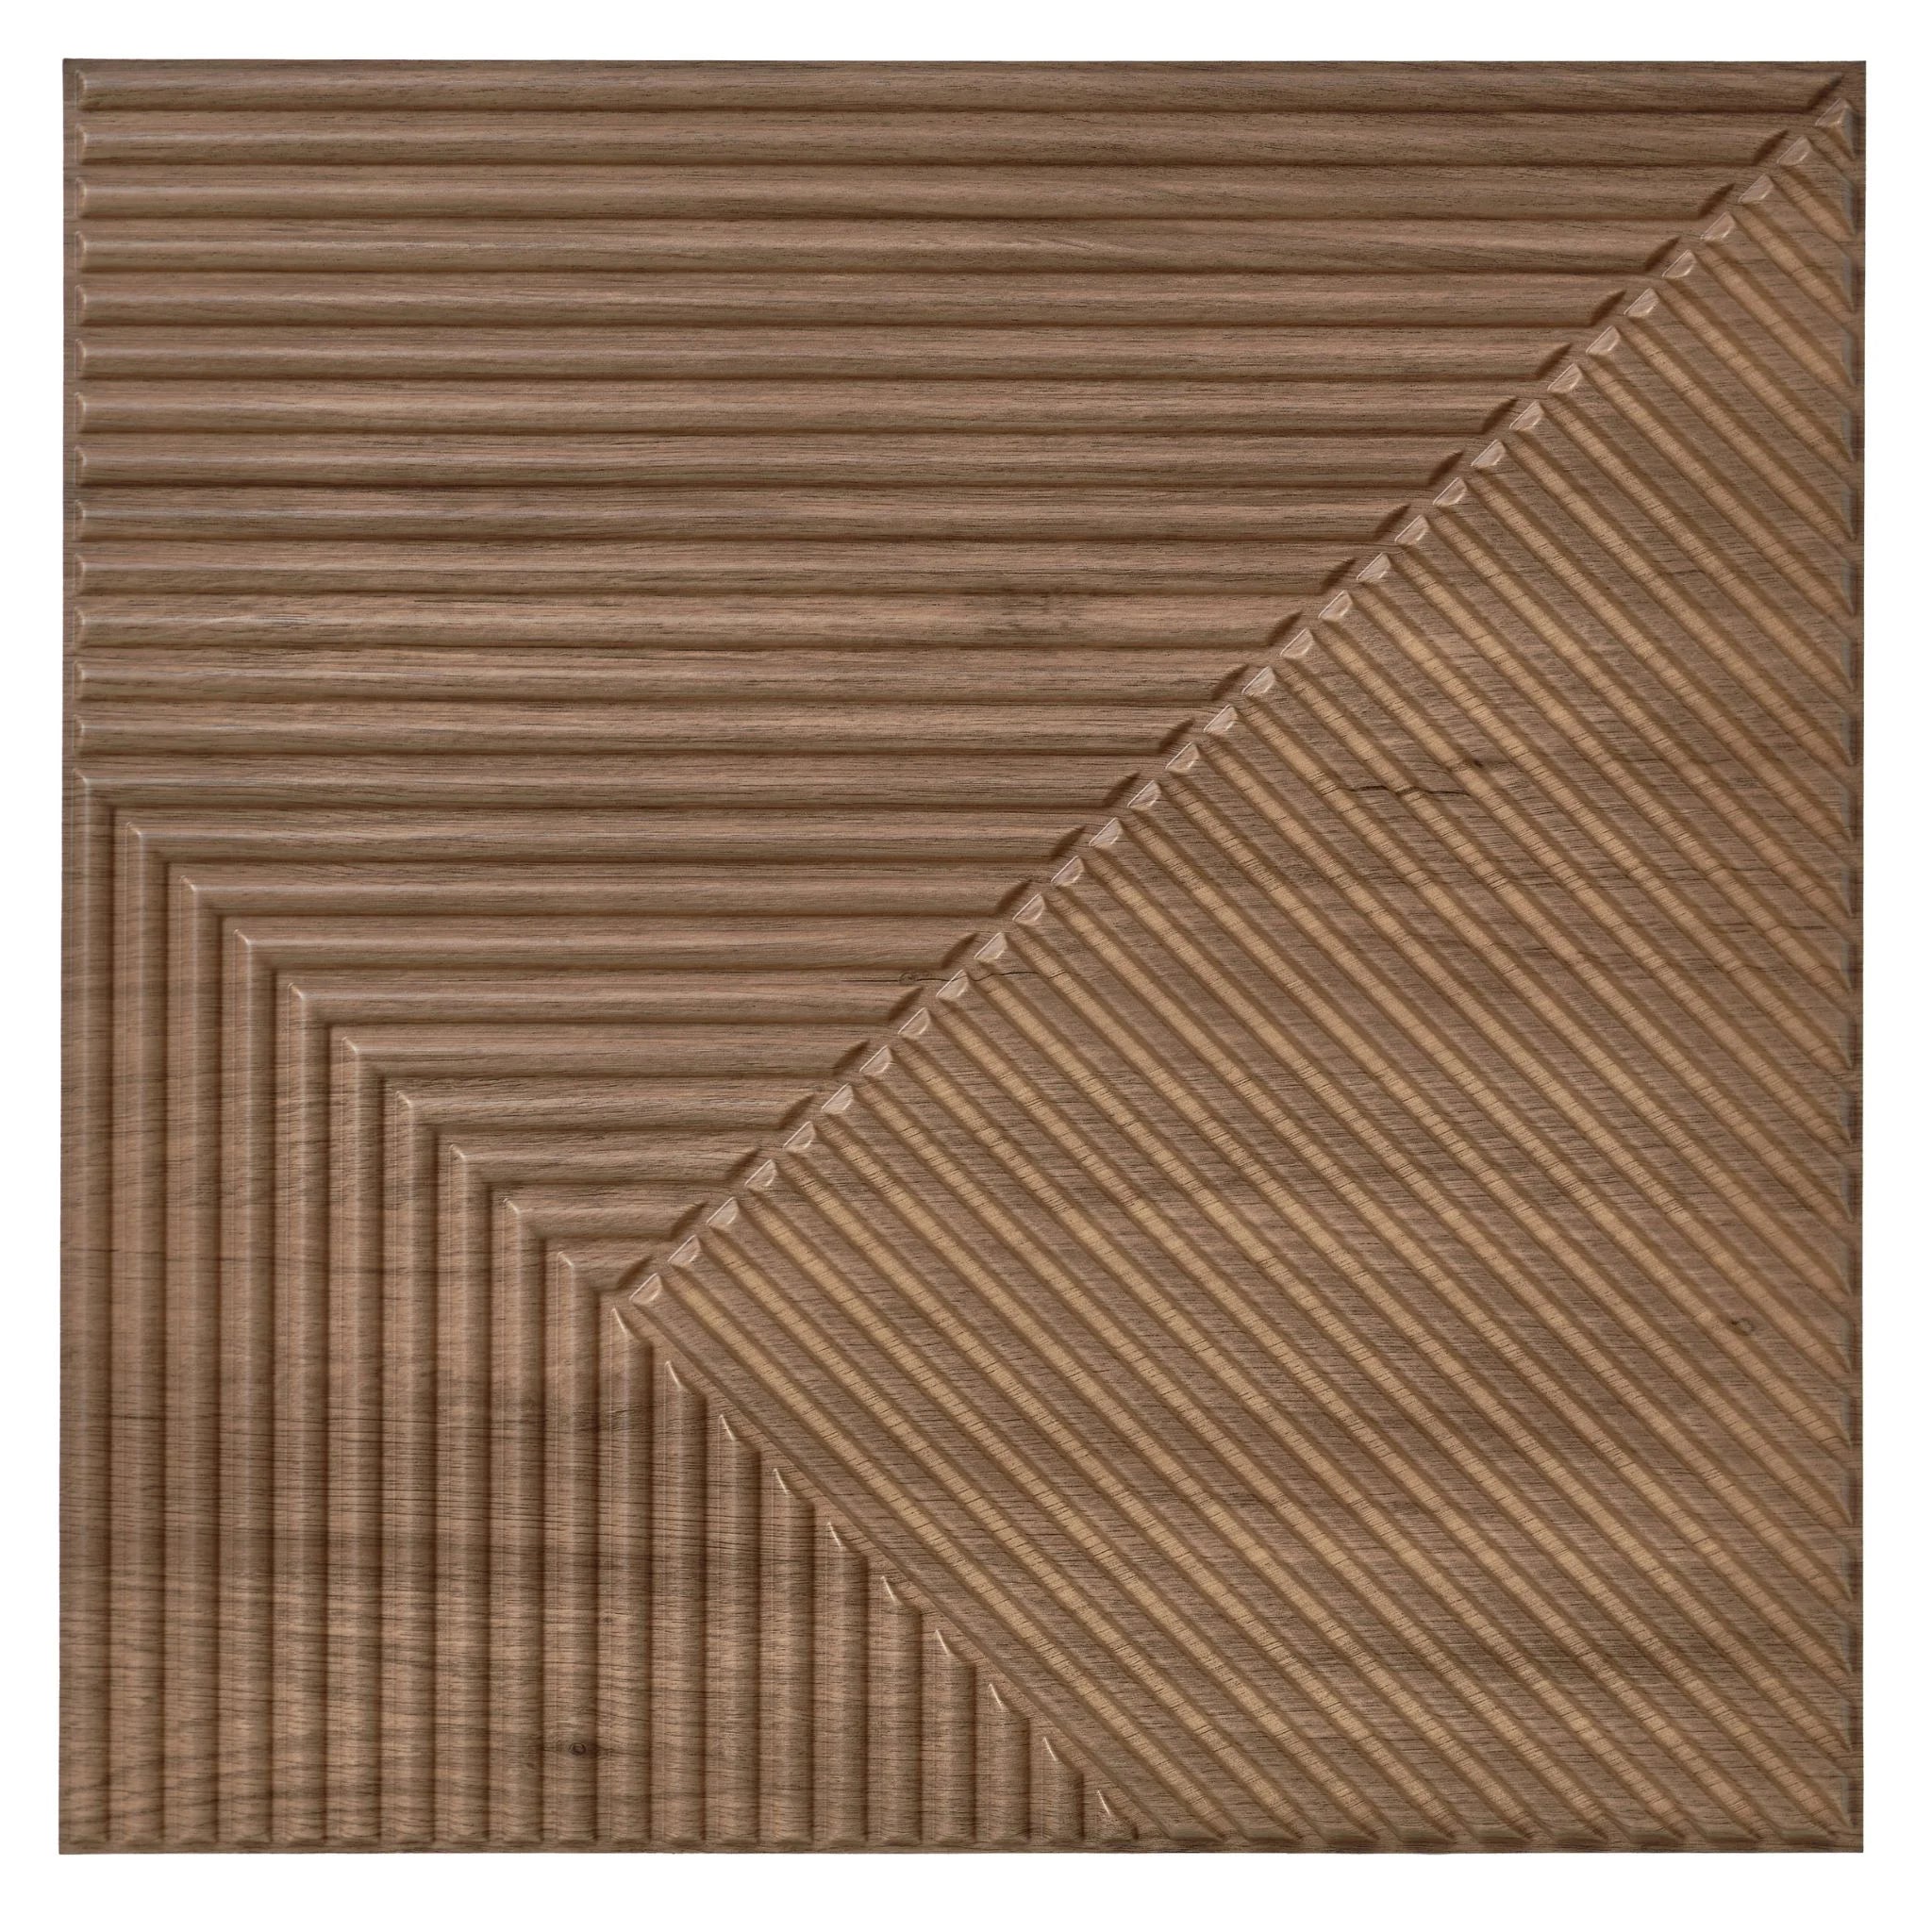 Wooden PVC wall panel with geometric patterns in modern interior